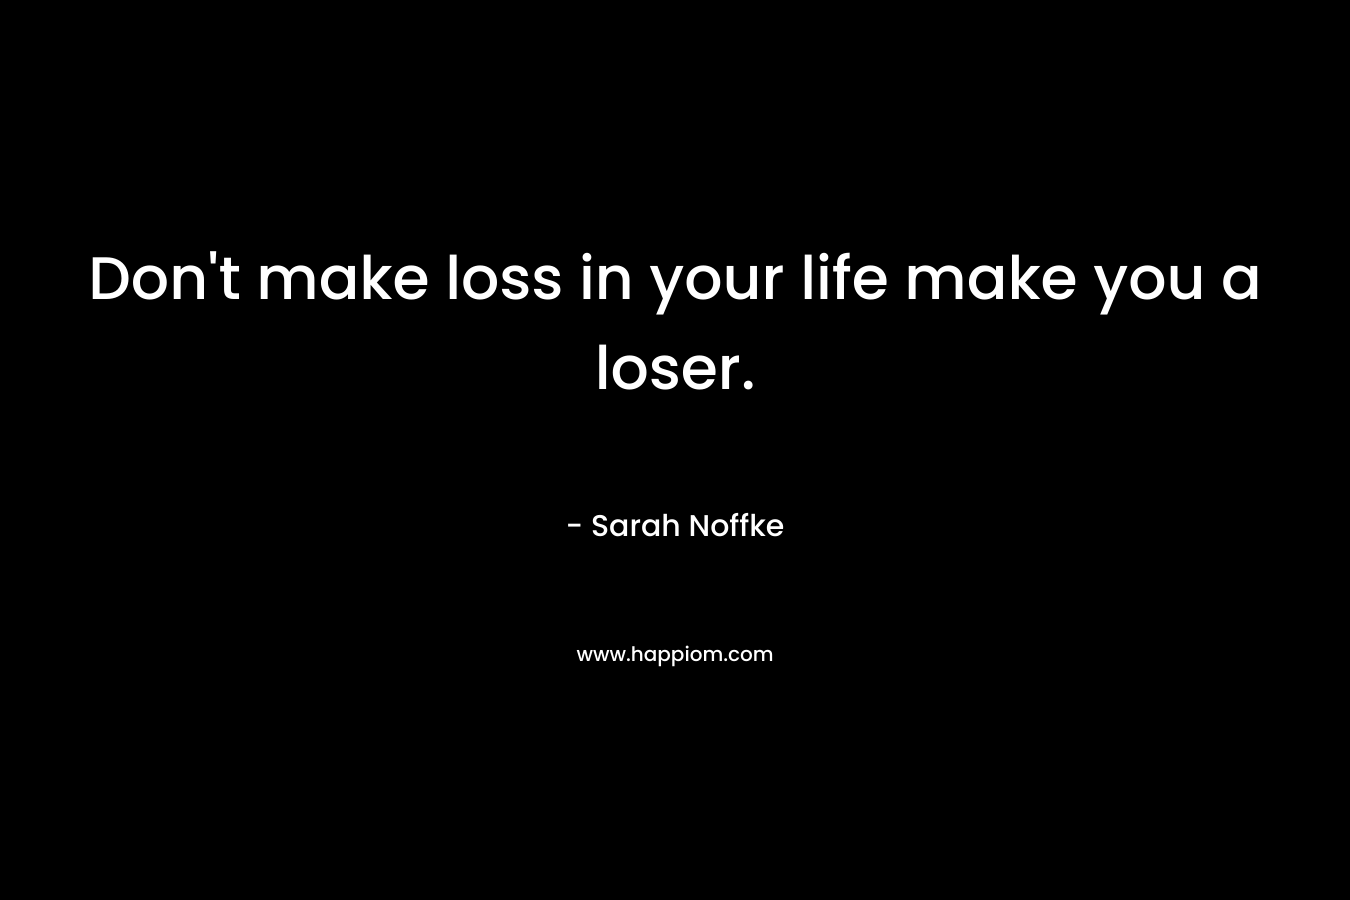 Don't make loss in your life make you a loser.